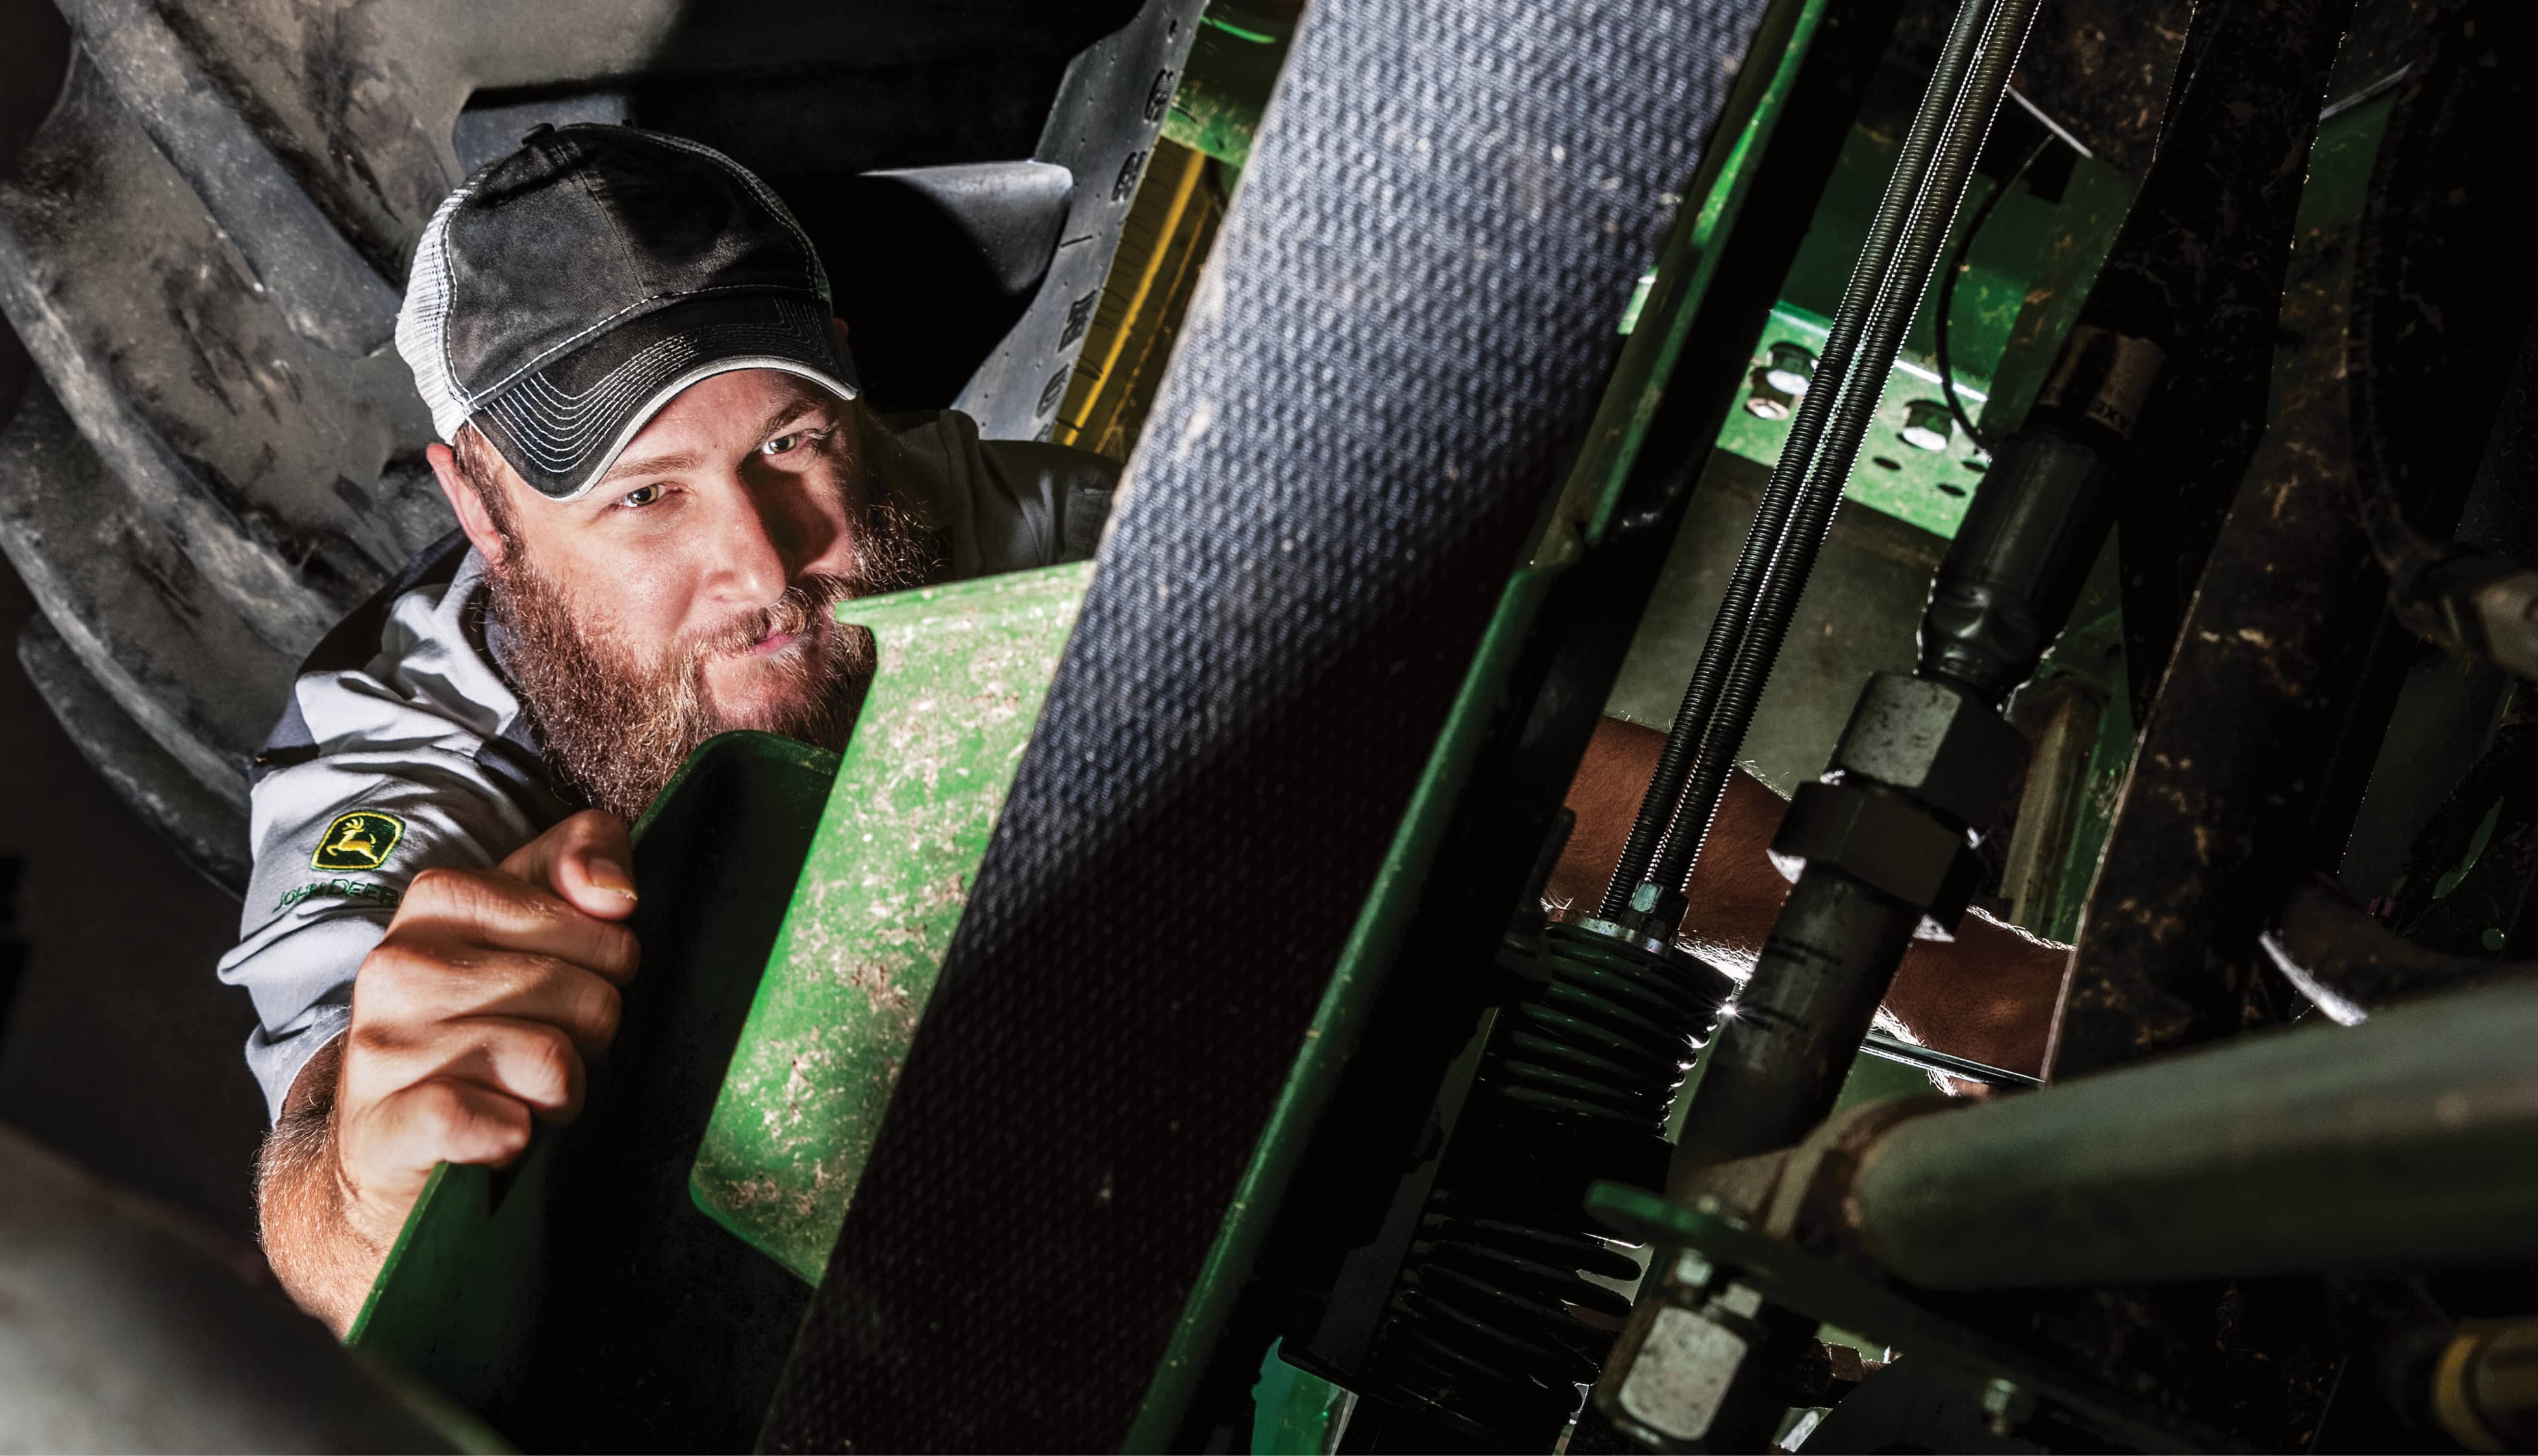 Man wearing a cap and technician uniform, underneath a tractor reaching up towards a part